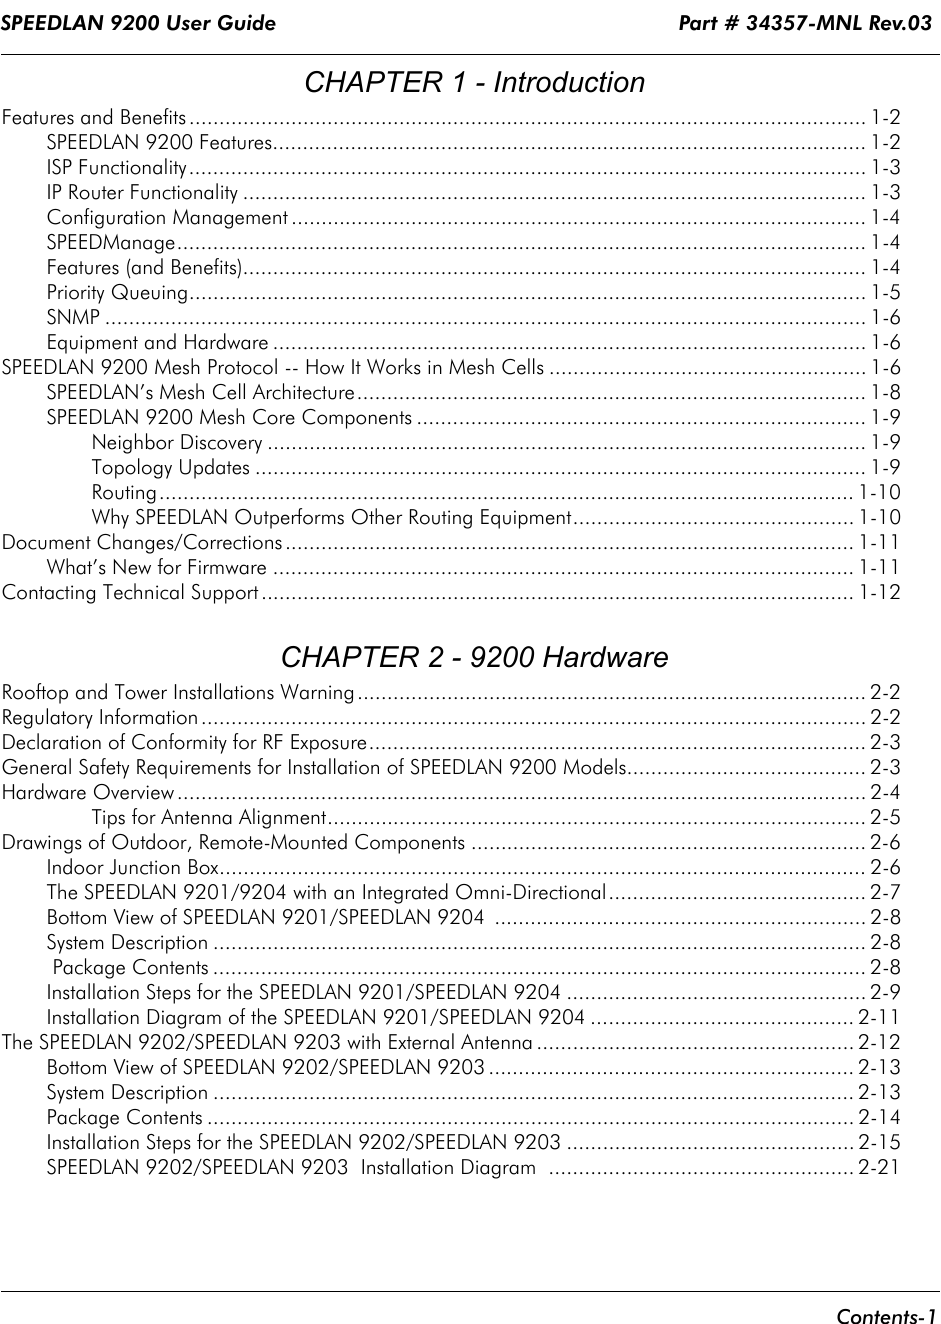 SPEEDLAN 9200 User Guide                                                                 Part # 34357-MNL Rev.03      Contents-1                                                                                                                                                                        CHAPTER 1 - IntroductionFeatures and Benefits ................................................................................................................. 1-2SPEEDLAN 9200 Features................................................................................................... 1-2ISP Functionality................................................................................................................. 1-3IP Router Functionality ........................................................................................................ 1-3Configuration Management ................................................................................................ 1-4SPEEDManage................................................................................................................... 1-4Features (and Benefits)........................................................................................................ 1-4Priority Queuing................................................................................................................. 1-5SNMP ............................................................................................................................... 1-6Equipment and Hardware ................................................................................................... 1-6SPEEDLAN 9200 Mesh Protocol -- How It Works in Mesh Cells ..................................................... 1-6SPEEDLAN’s Mesh Cell Architecture..................................................................................... 1-8SPEEDLAN 9200 Mesh Core Components ........................................................................... 1-9Neighbor Discovery .................................................................................................... 1-9Topology Updates ...................................................................................................... 1-9Routing.................................................................................................................... 1-10Why SPEEDLAN Outperforms Other Routing Equipment............................................... 1-10Document Changes/Corrections............................................................................................... 1-11What’s New for Firmware ................................................................................................. 1-11Contacting Technical Support ................................................................................................... 1-12 CHAPTER 2 - 9200 HardwareRooftop and Tower Installations Warning..................................................................................... 2-2Regulatory Information ............................................................................................................... 2-2Declaration of Conformity for RF Exposure................................................................................... 2-3General Safety Requirements for Installation of SPEEDLAN 9200 Models........................................ 2-3Hardware Overview ................................................................................................................... 2-4Tips for Antenna Alignment.......................................................................................... 2-5Drawings of Outdoor, Remote-Mounted Components .................................................................. 2-6Indoor Junction Box............................................................................................................ 2-6The SPEEDLAN 9201/9204 with an Integrated Omni-Directional........................................... 2-7Bottom View of SPEEDLAN 9201/SPEEDLAN 9204  .............................................................. 2-8System Description ............................................................................................................. 2-8 Package Contents ............................................................................................................. 2-8Installation Steps for the SPEEDLAN 9201/SPEEDLAN 9204 .................................................. 2-9Installation Diagram of the SPEEDLAN 9201/SPEEDLAN 9204 ............................................ 2-11The SPEEDLAN 9202/SPEEDLAN 9203 with External Antenna ..................................................... 2-12Bottom View of SPEEDLAN 9202/SPEEDLAN 9203 ............................................................. 2-13System Description ........................................................................................................... 2-13Package Contents ............................................................................................................ 2-14Installation Steps for the SPEEDLAN 9202/SPEEDLAN 9203 ................................................ 2-15SPEEDLAN 9202/SPEEDLAN 9203  Installation Diagram  ................................................... 2-21